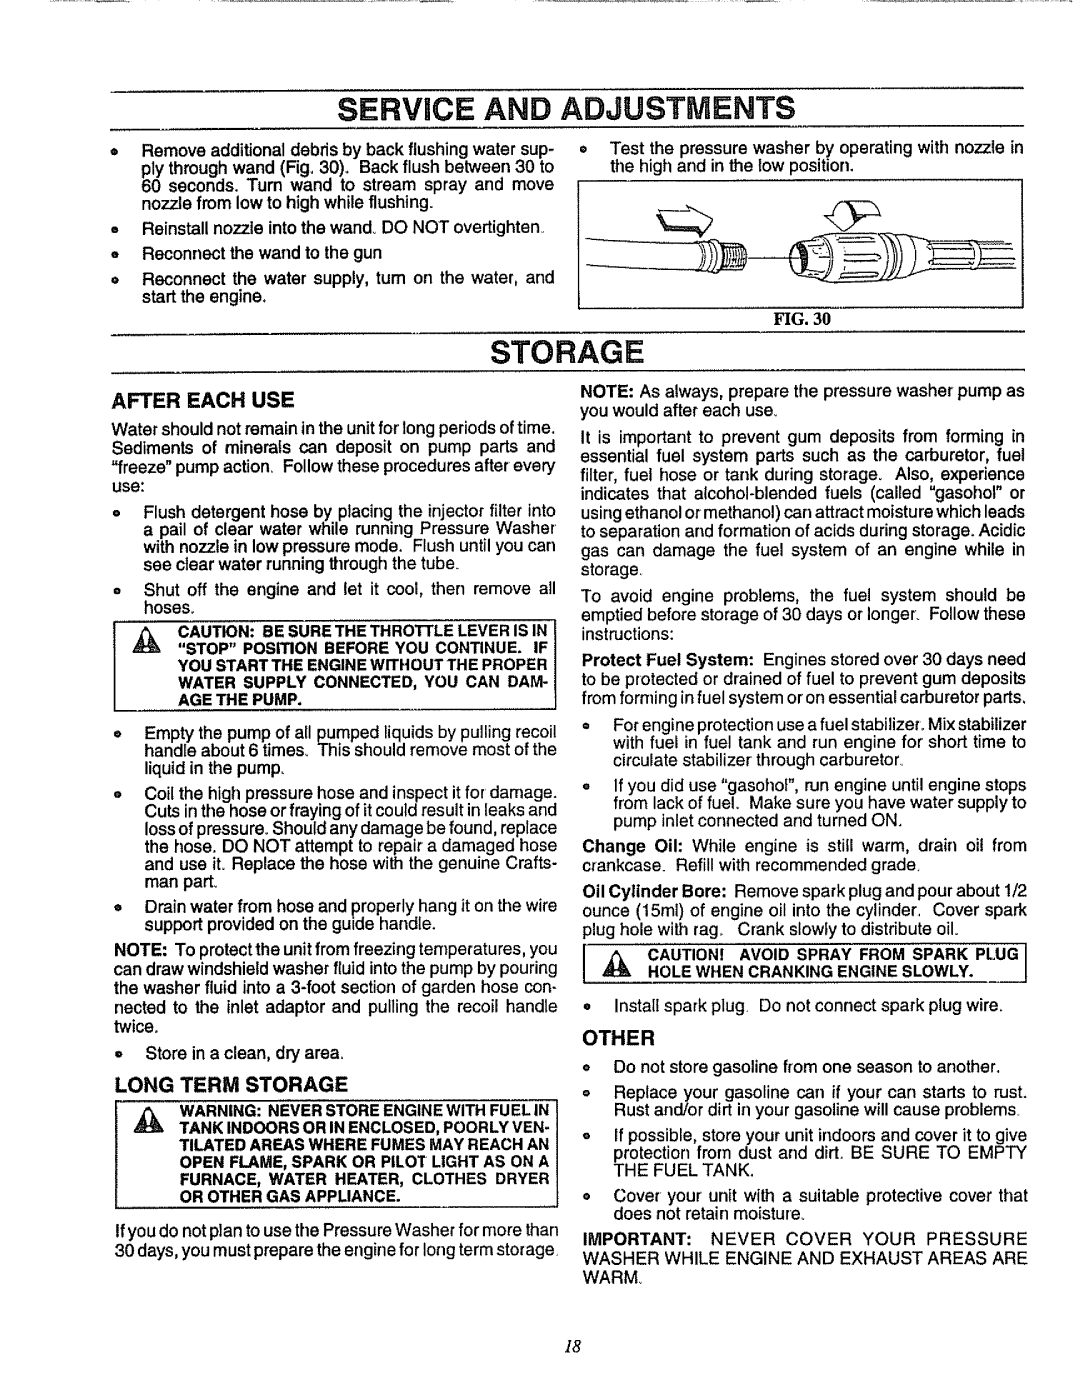 Craftsman 580.751781 owner manual After Each Use, Long Term Storage, Other, Service And Adjustments 